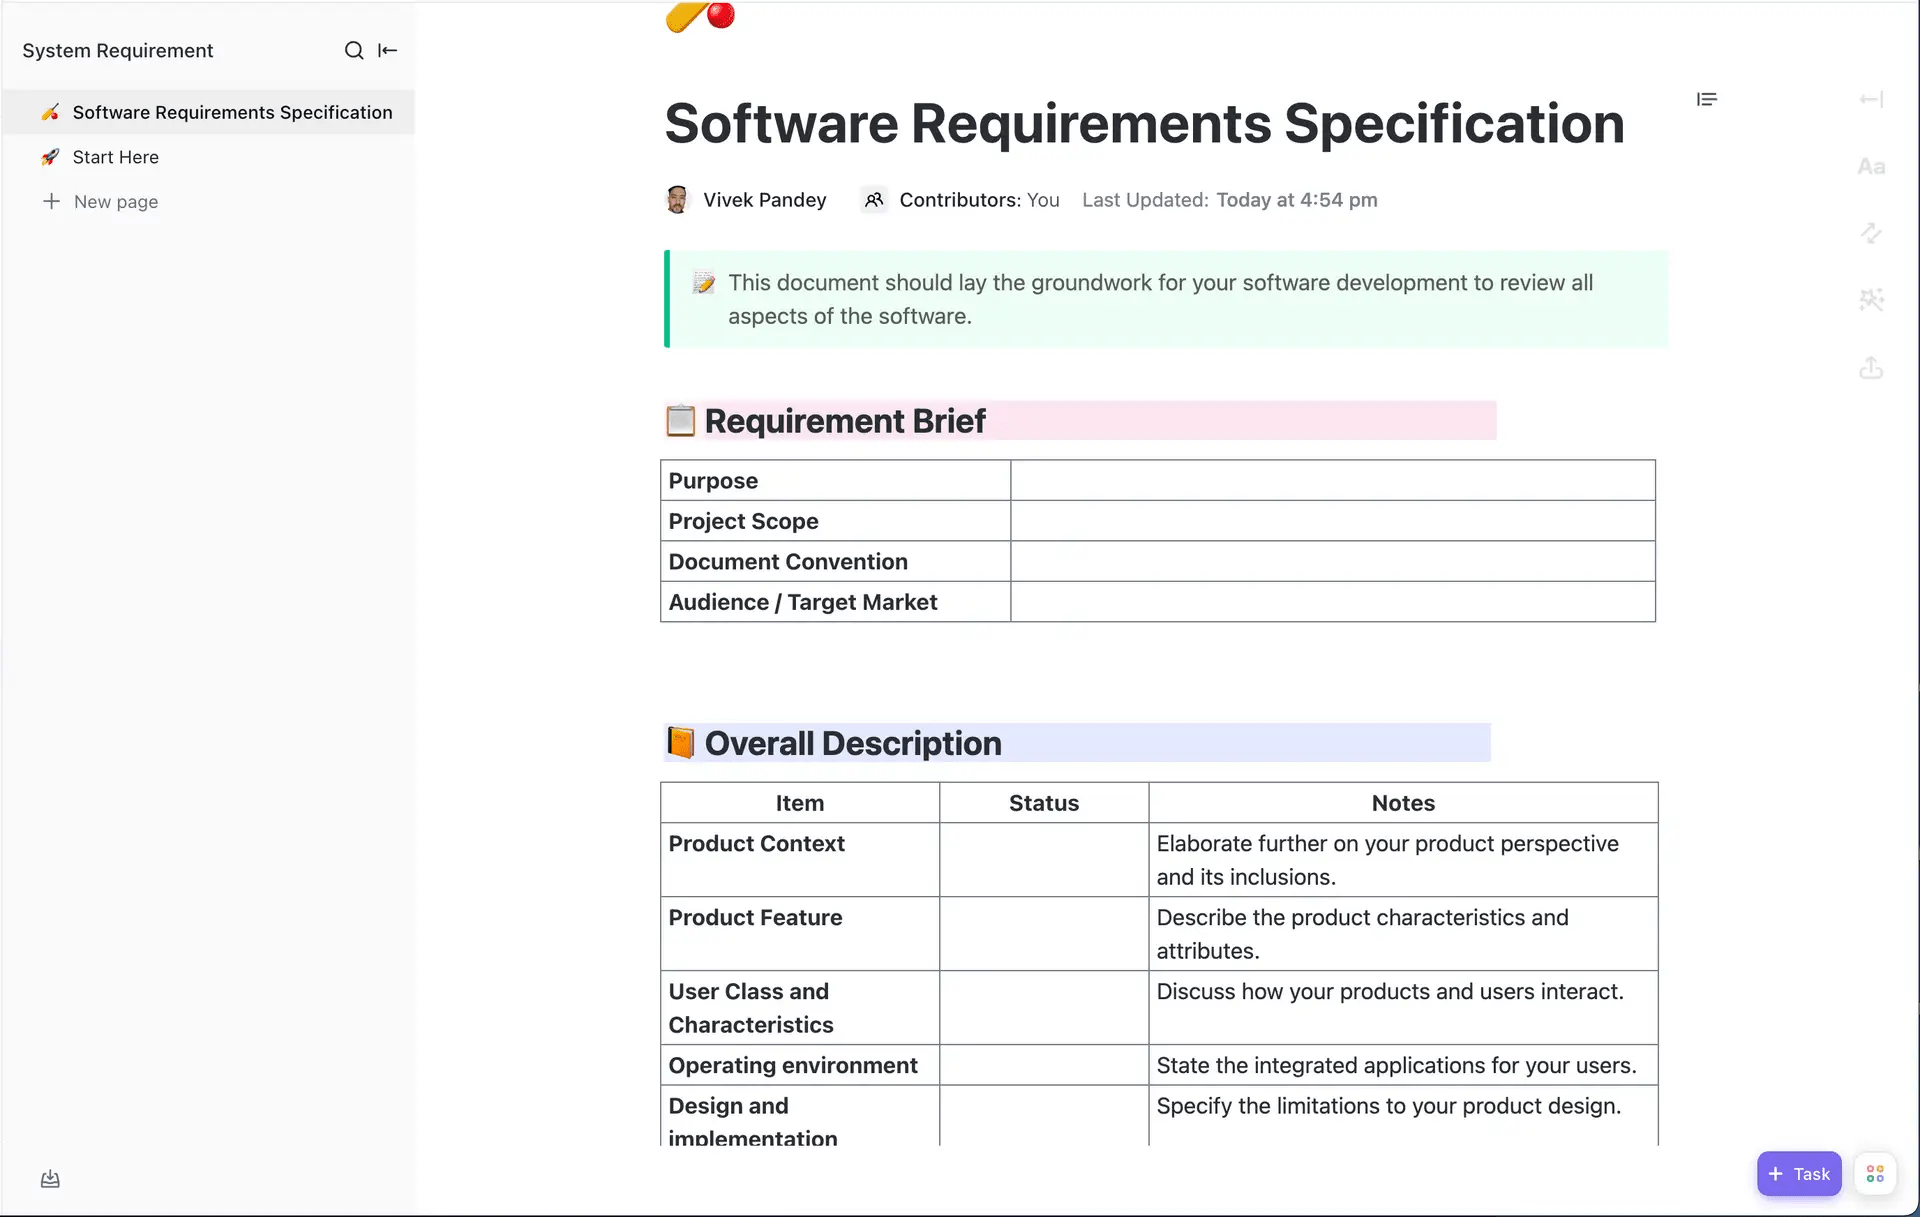 Use the System Requirements Template by ClickUp to add the purpose, project scope, and other essential information on your software development project